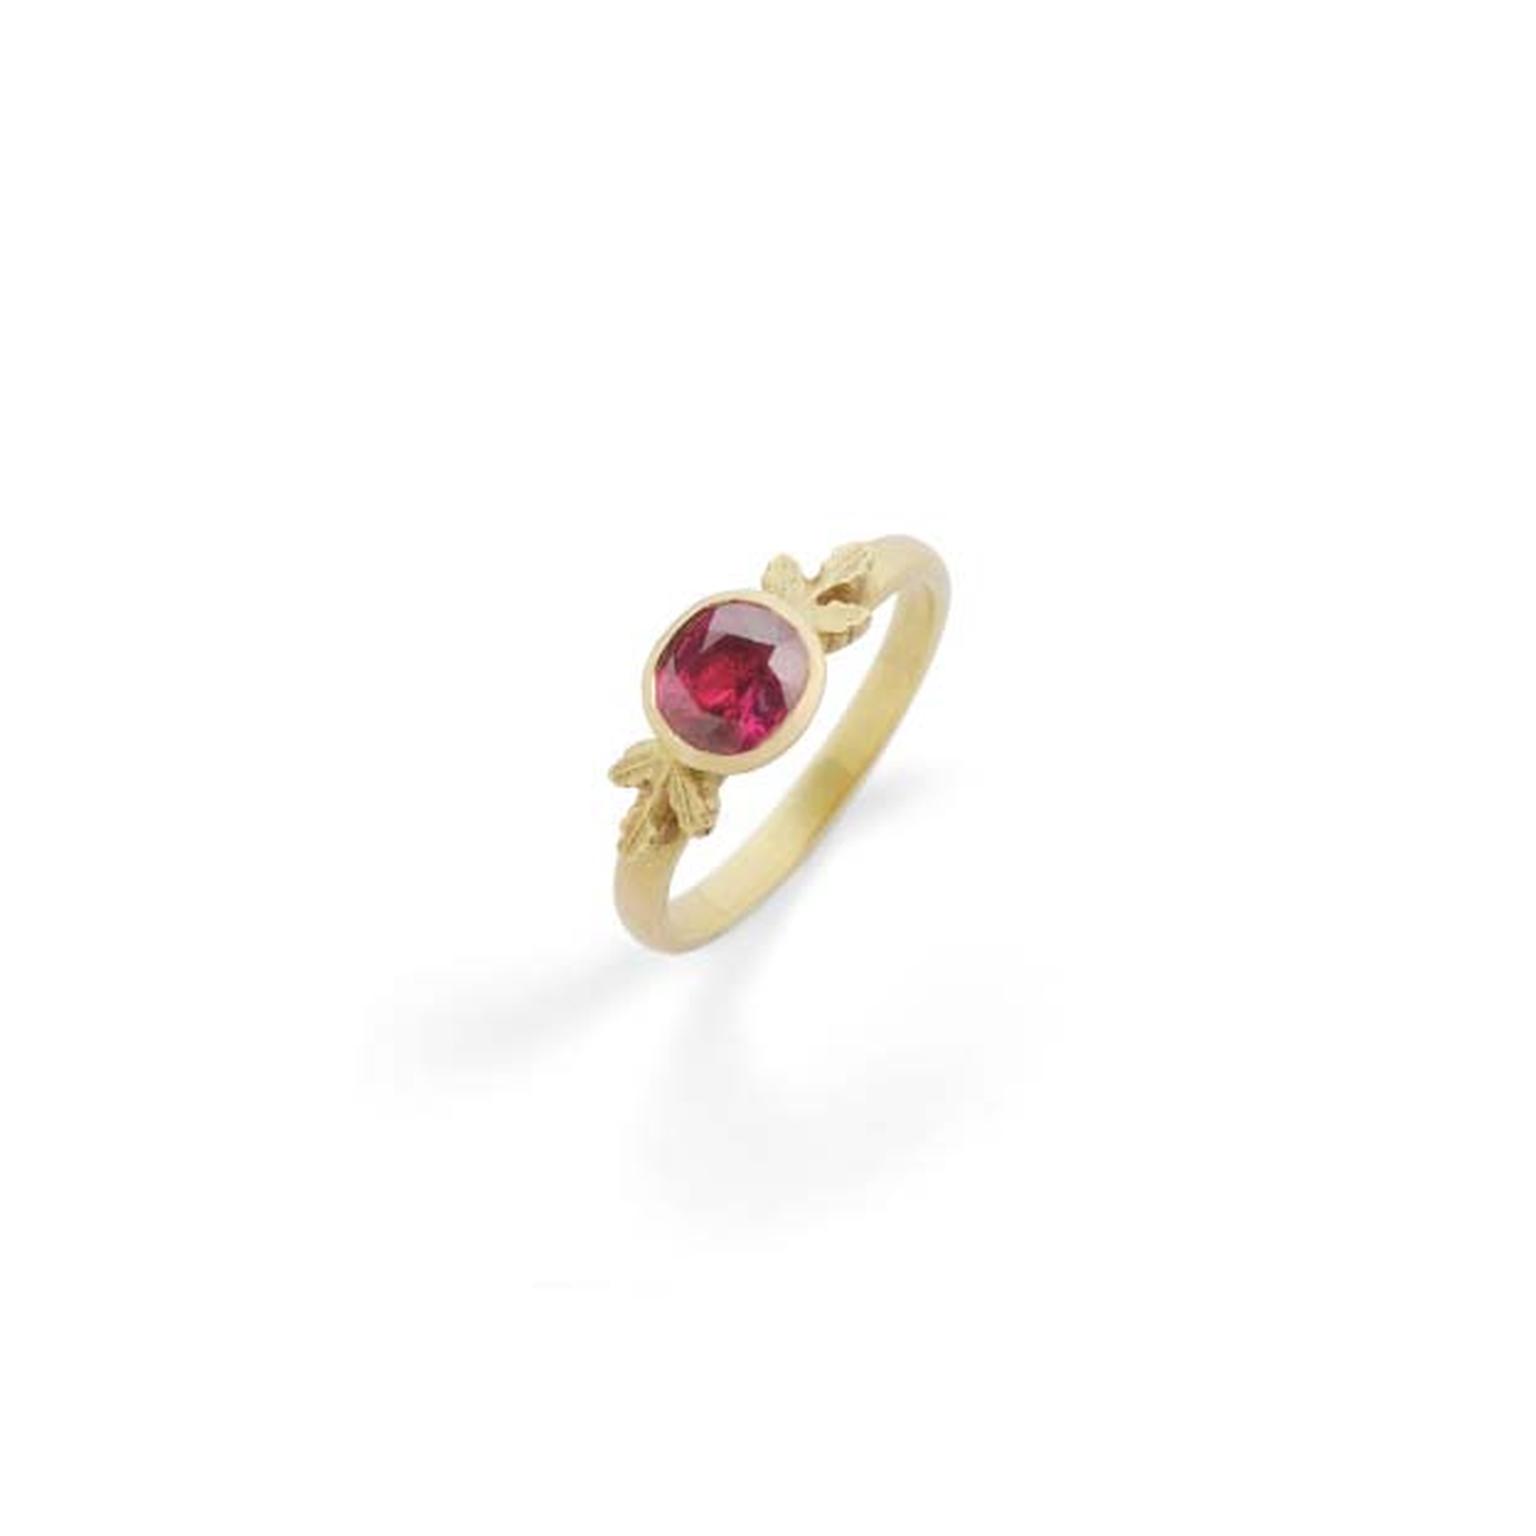 Beth Gilmour ruby unique engagement ring with a yellow gold band featuring the designer’s signature oak leaf motif.